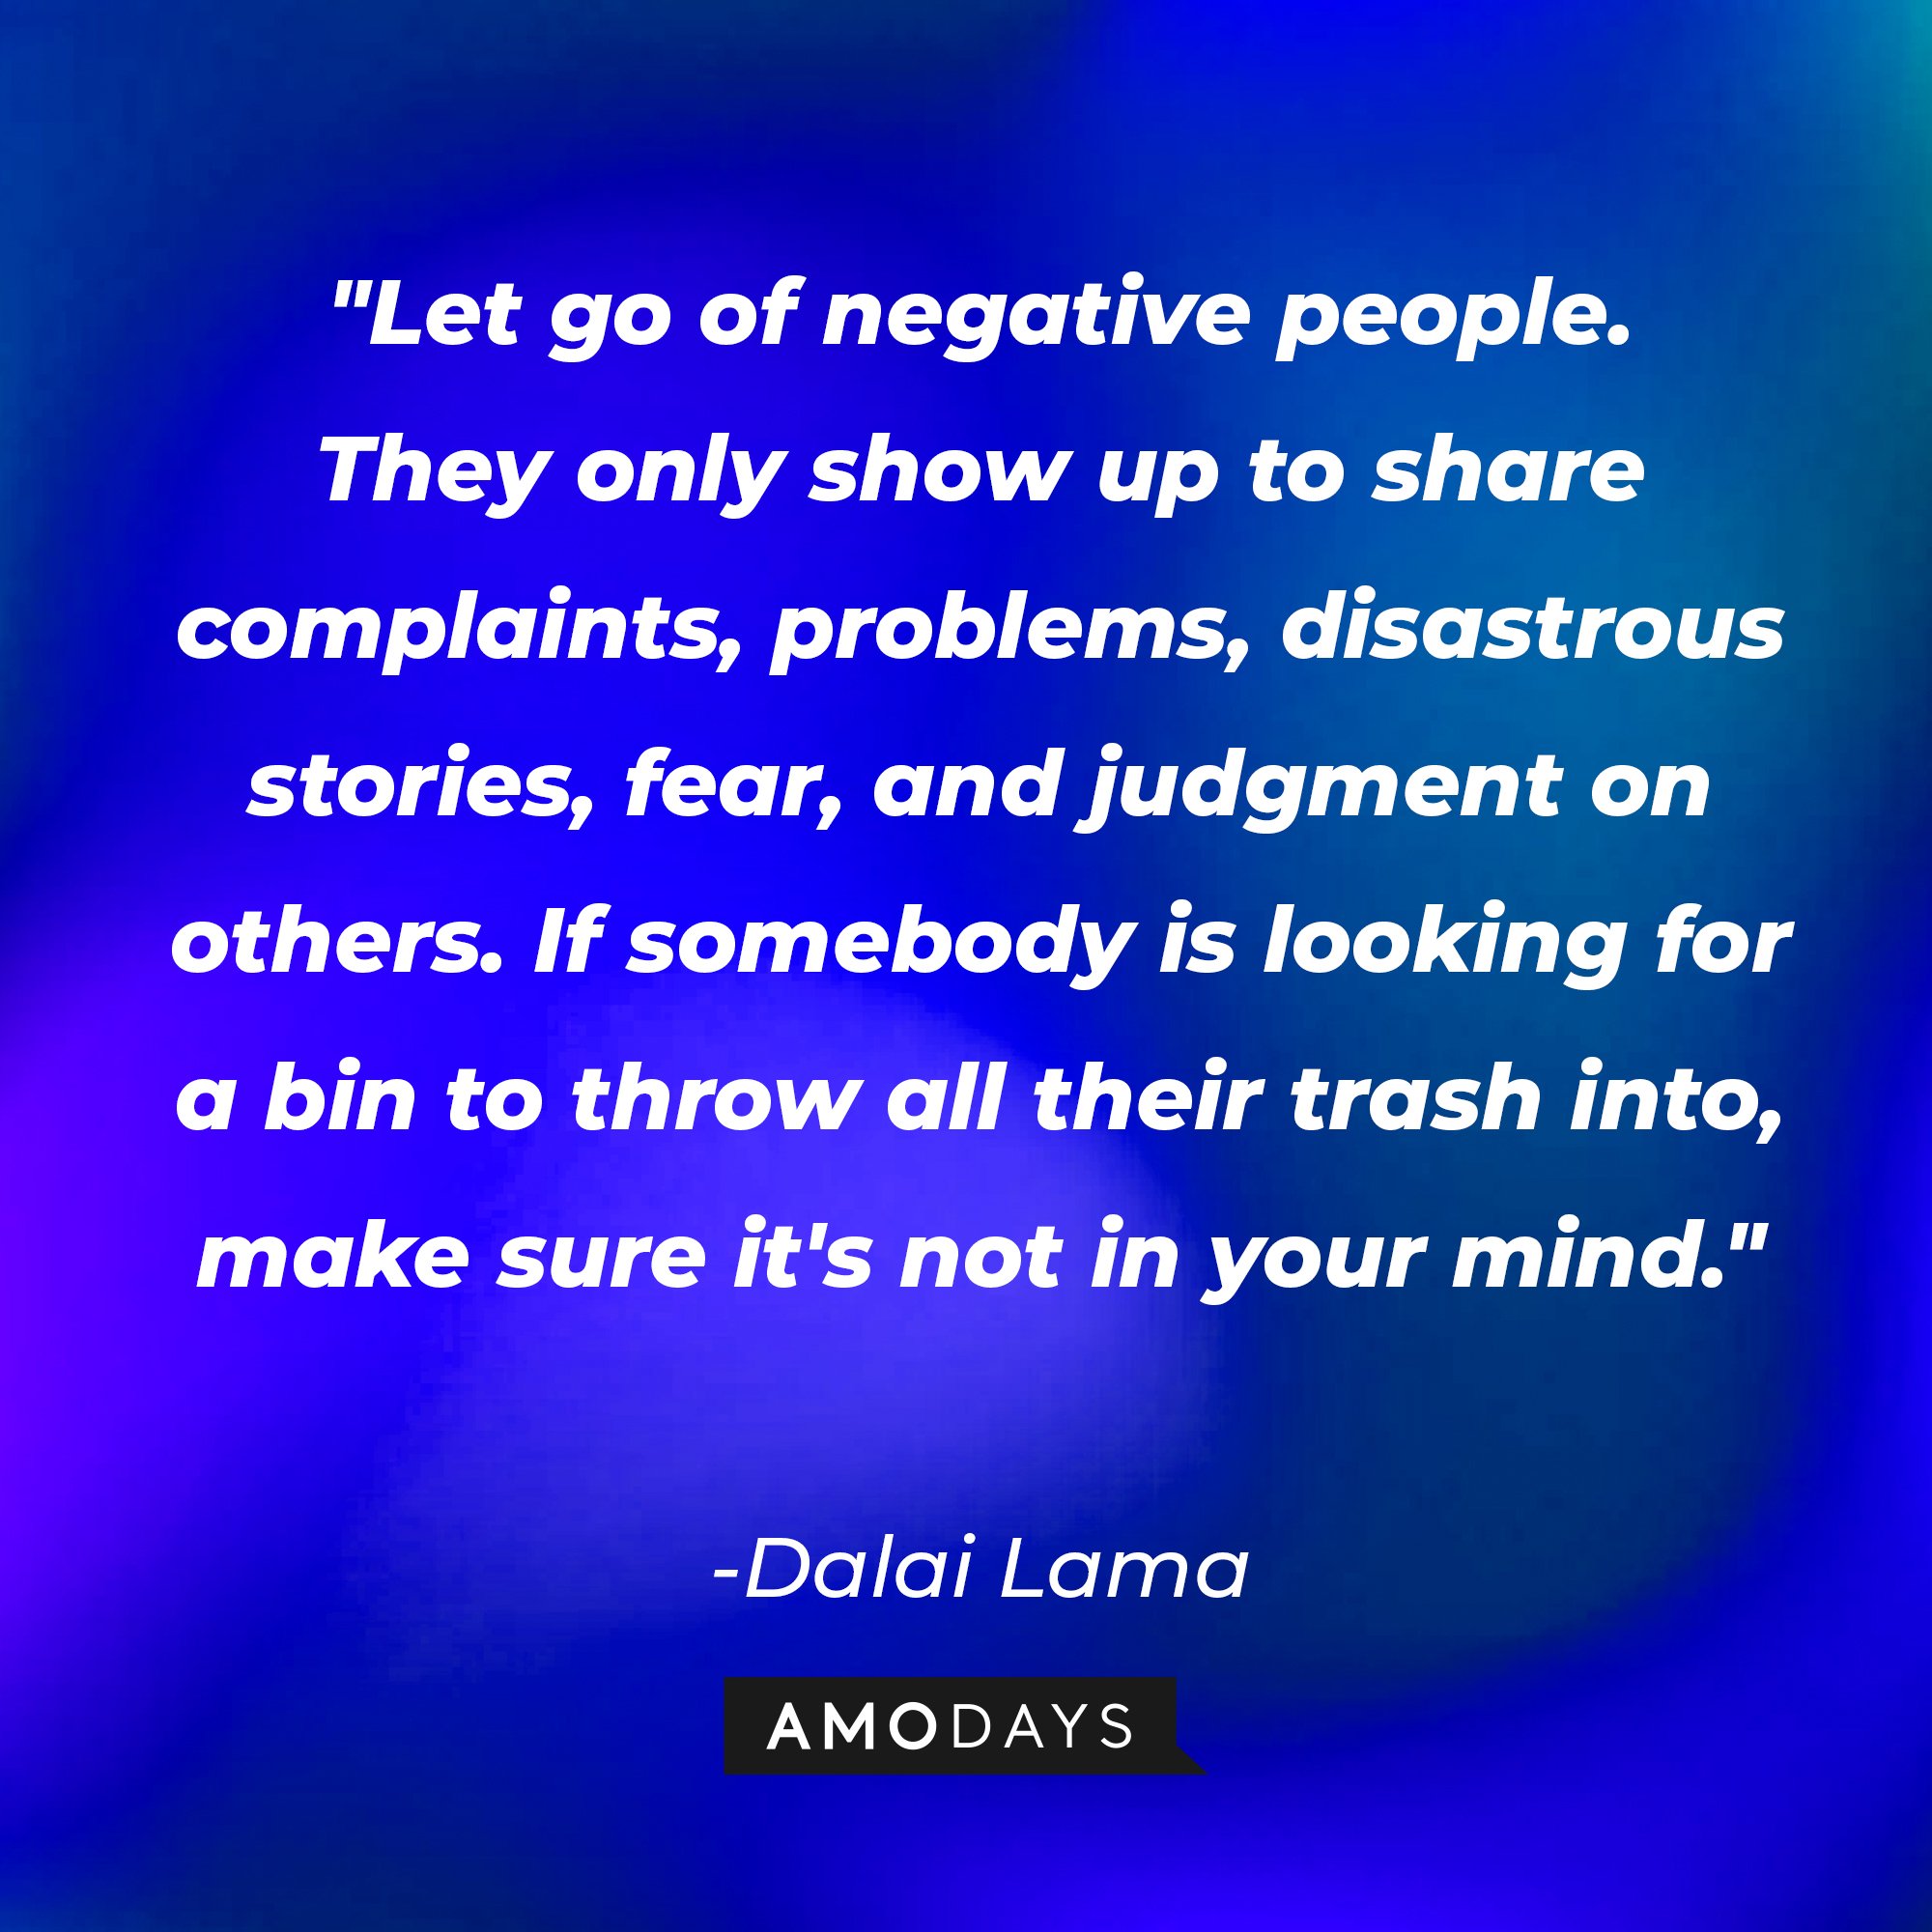 Dalai Lama’s quote: "Let go of negative people. They only show up to share complaints, problems, disastrous stories, fear, and judgment on others. If somebody is looking for a bin to throw all their trash into, make sure it's not in your mind." | Image: AmoDays